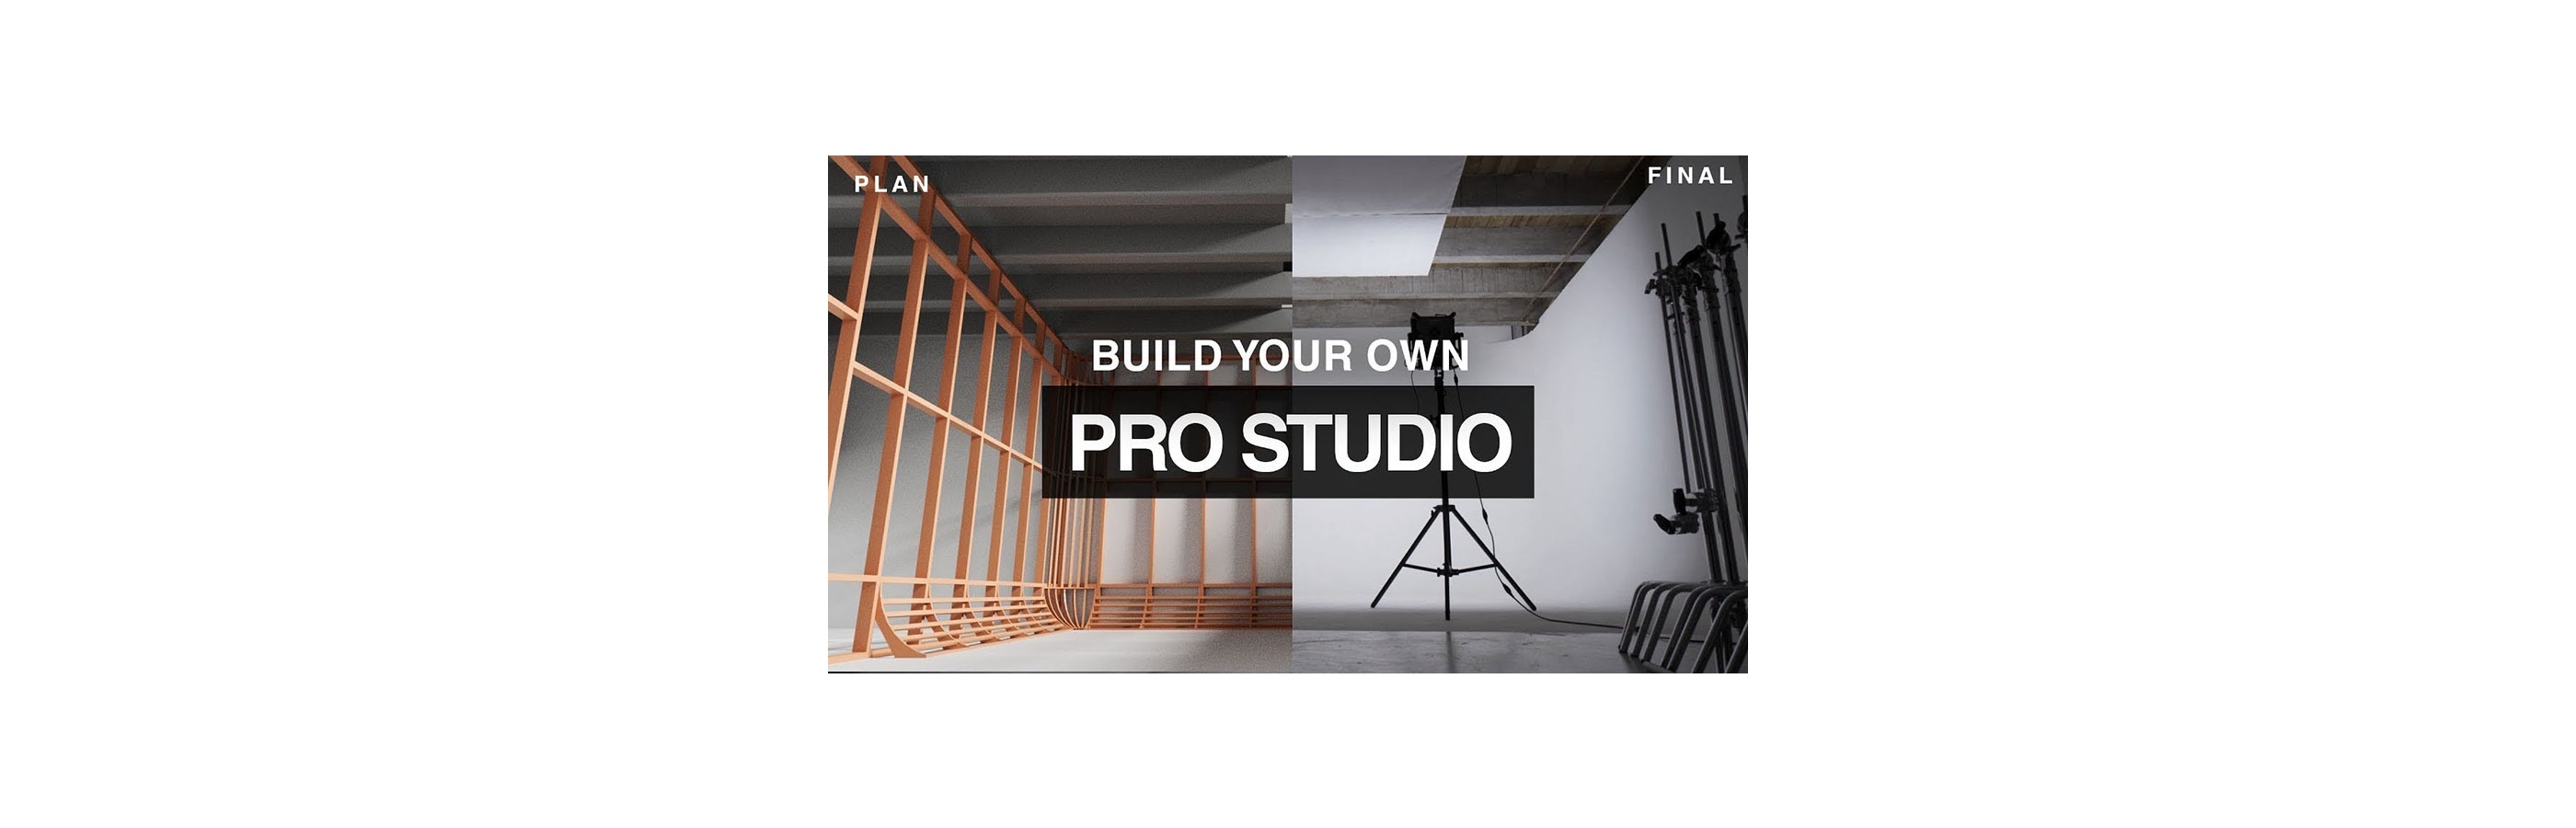 How to Build Your Own Pro Studio